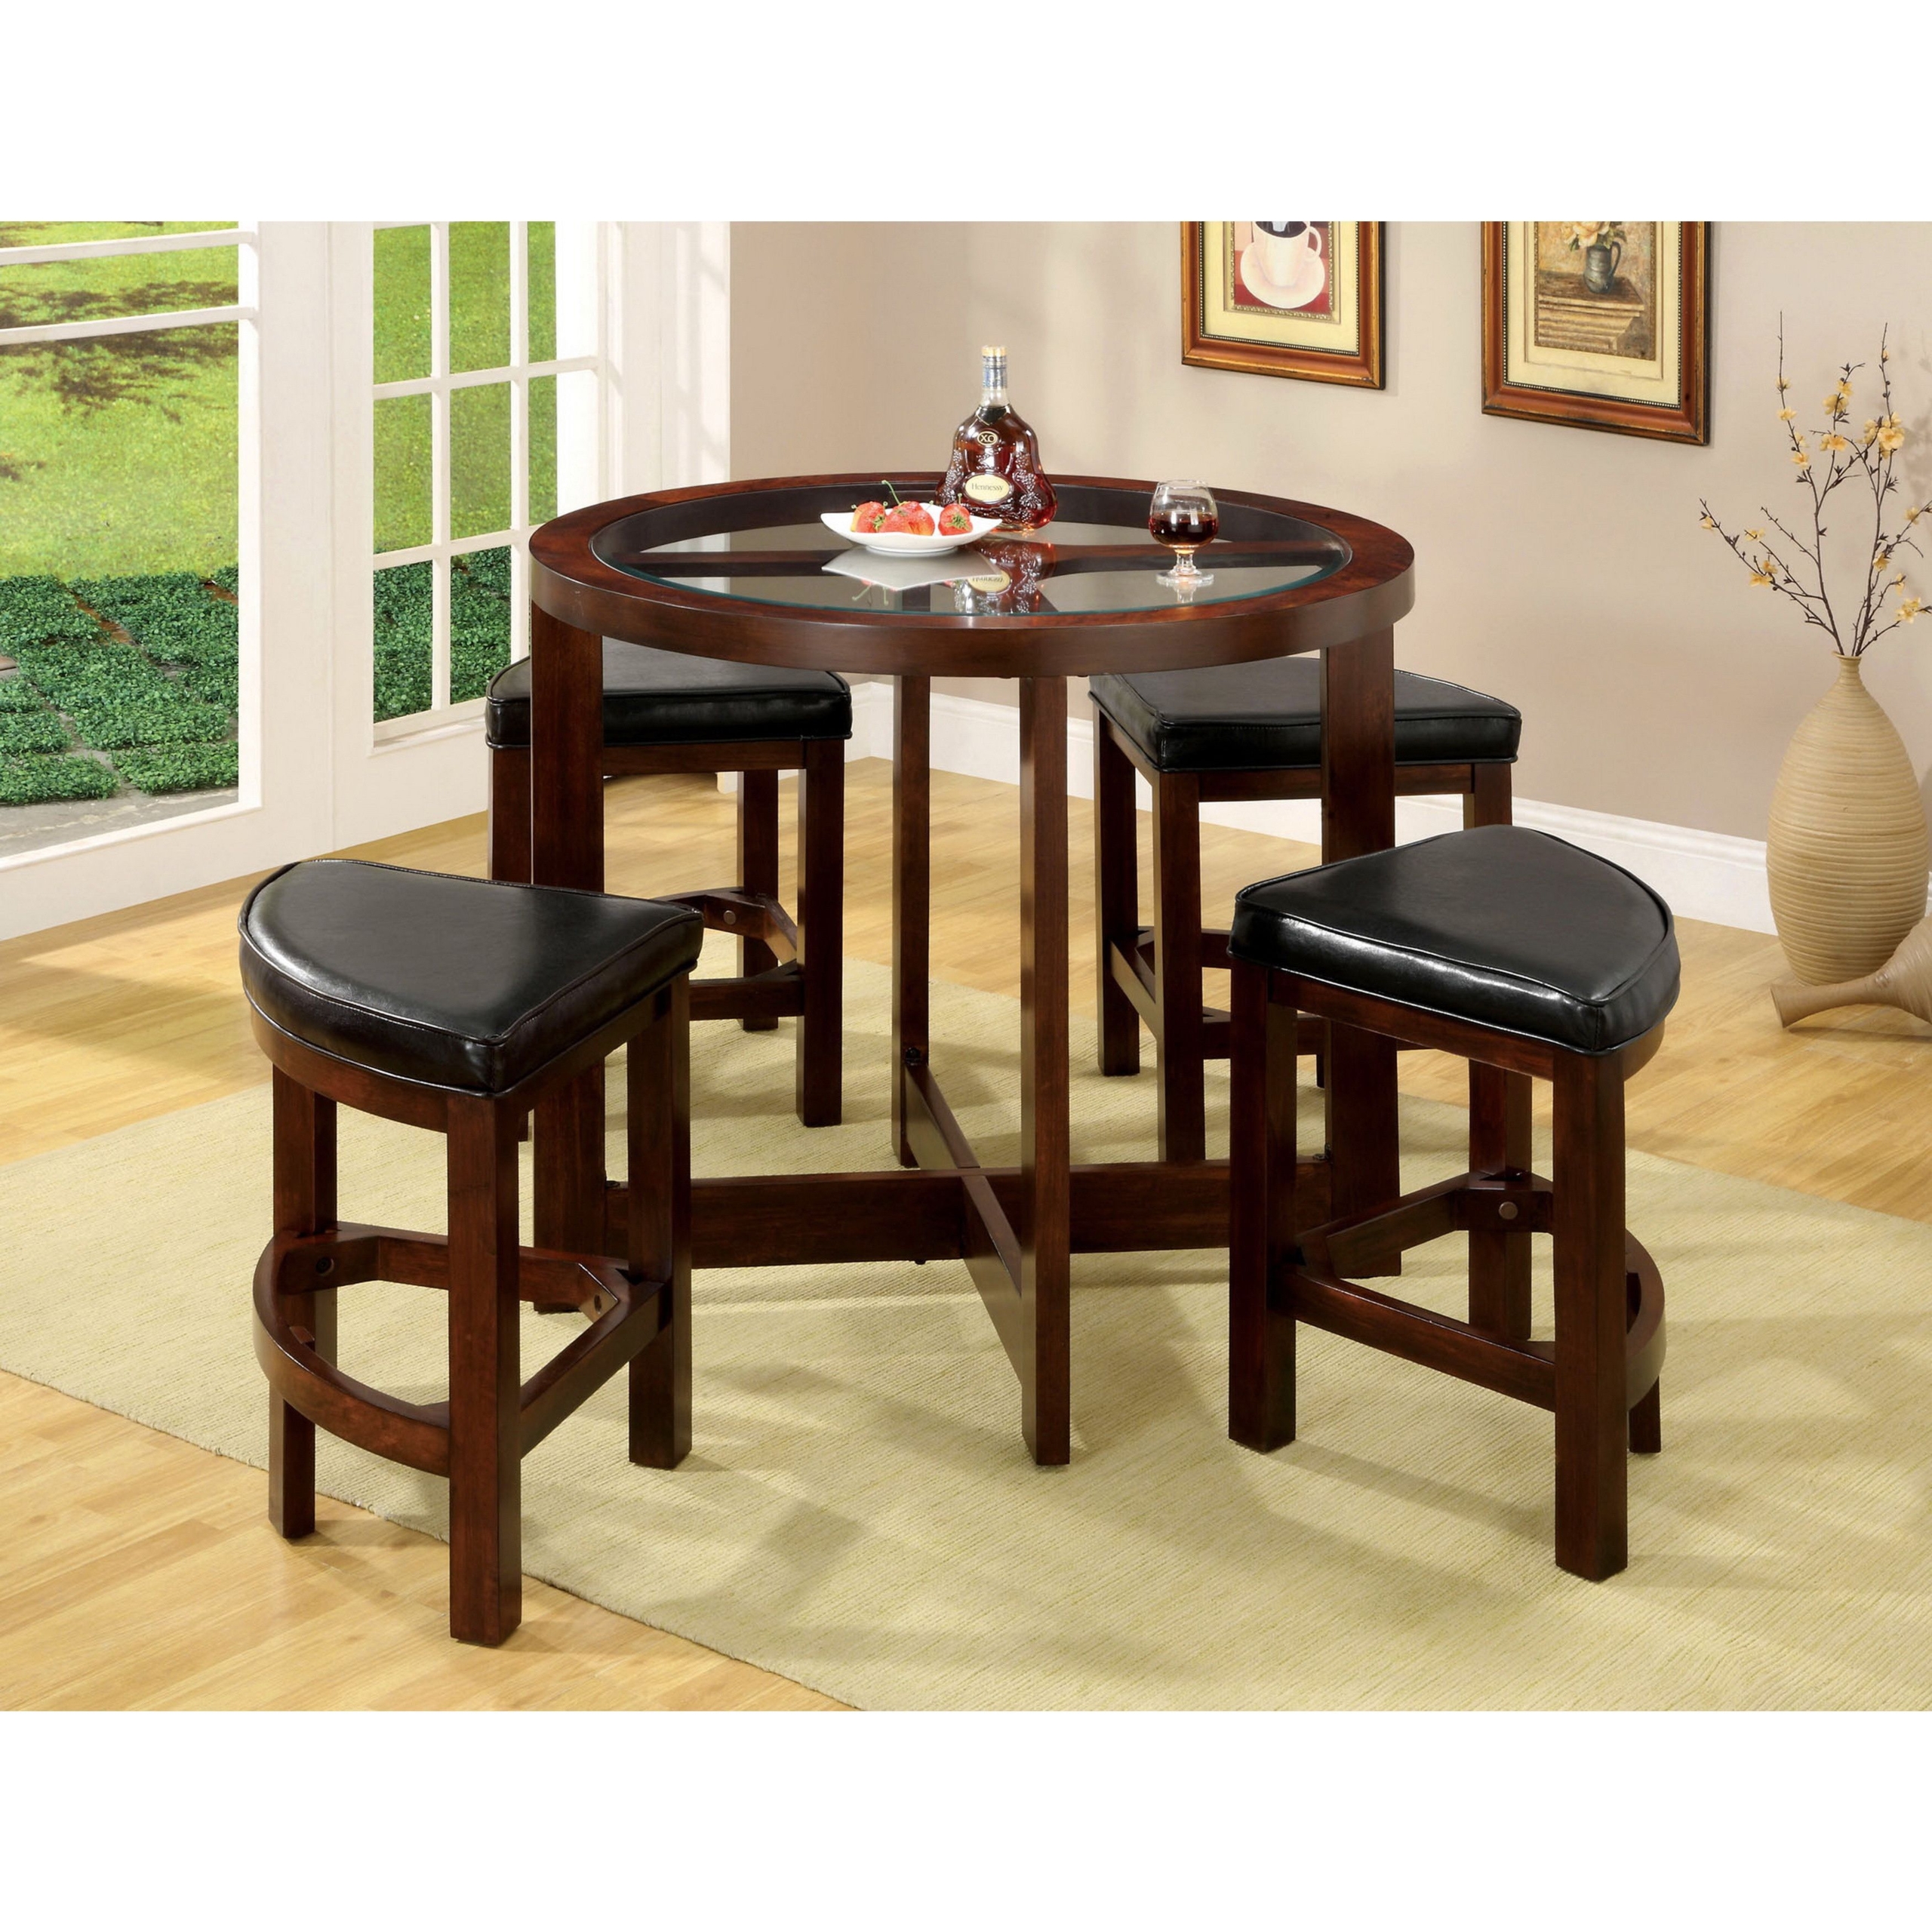 Round bar height dining table 6